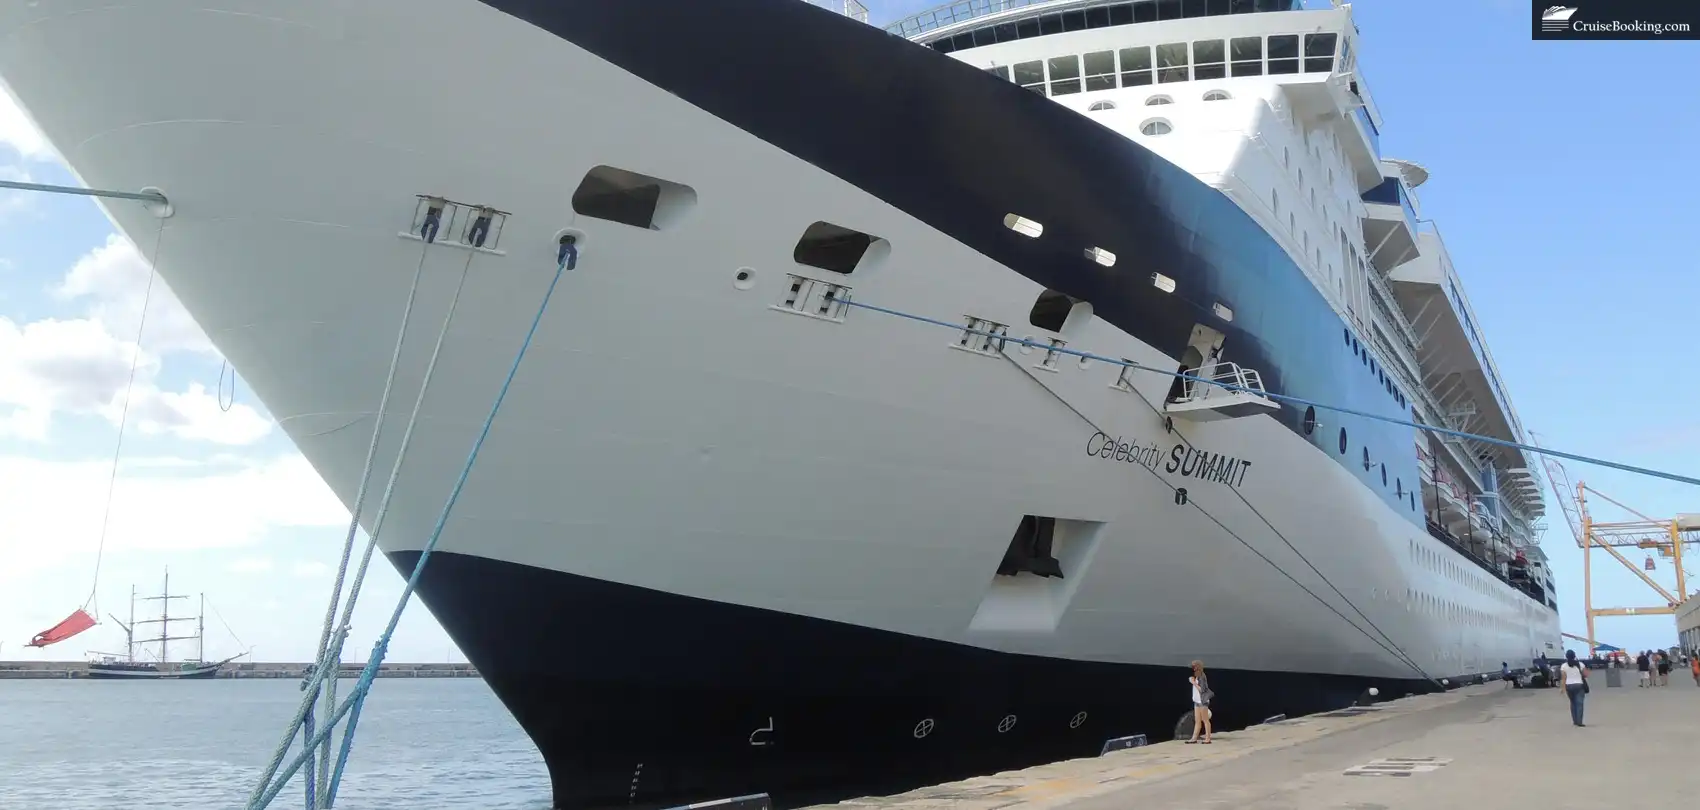 Pickleball is introduced on Celebrity Cruises